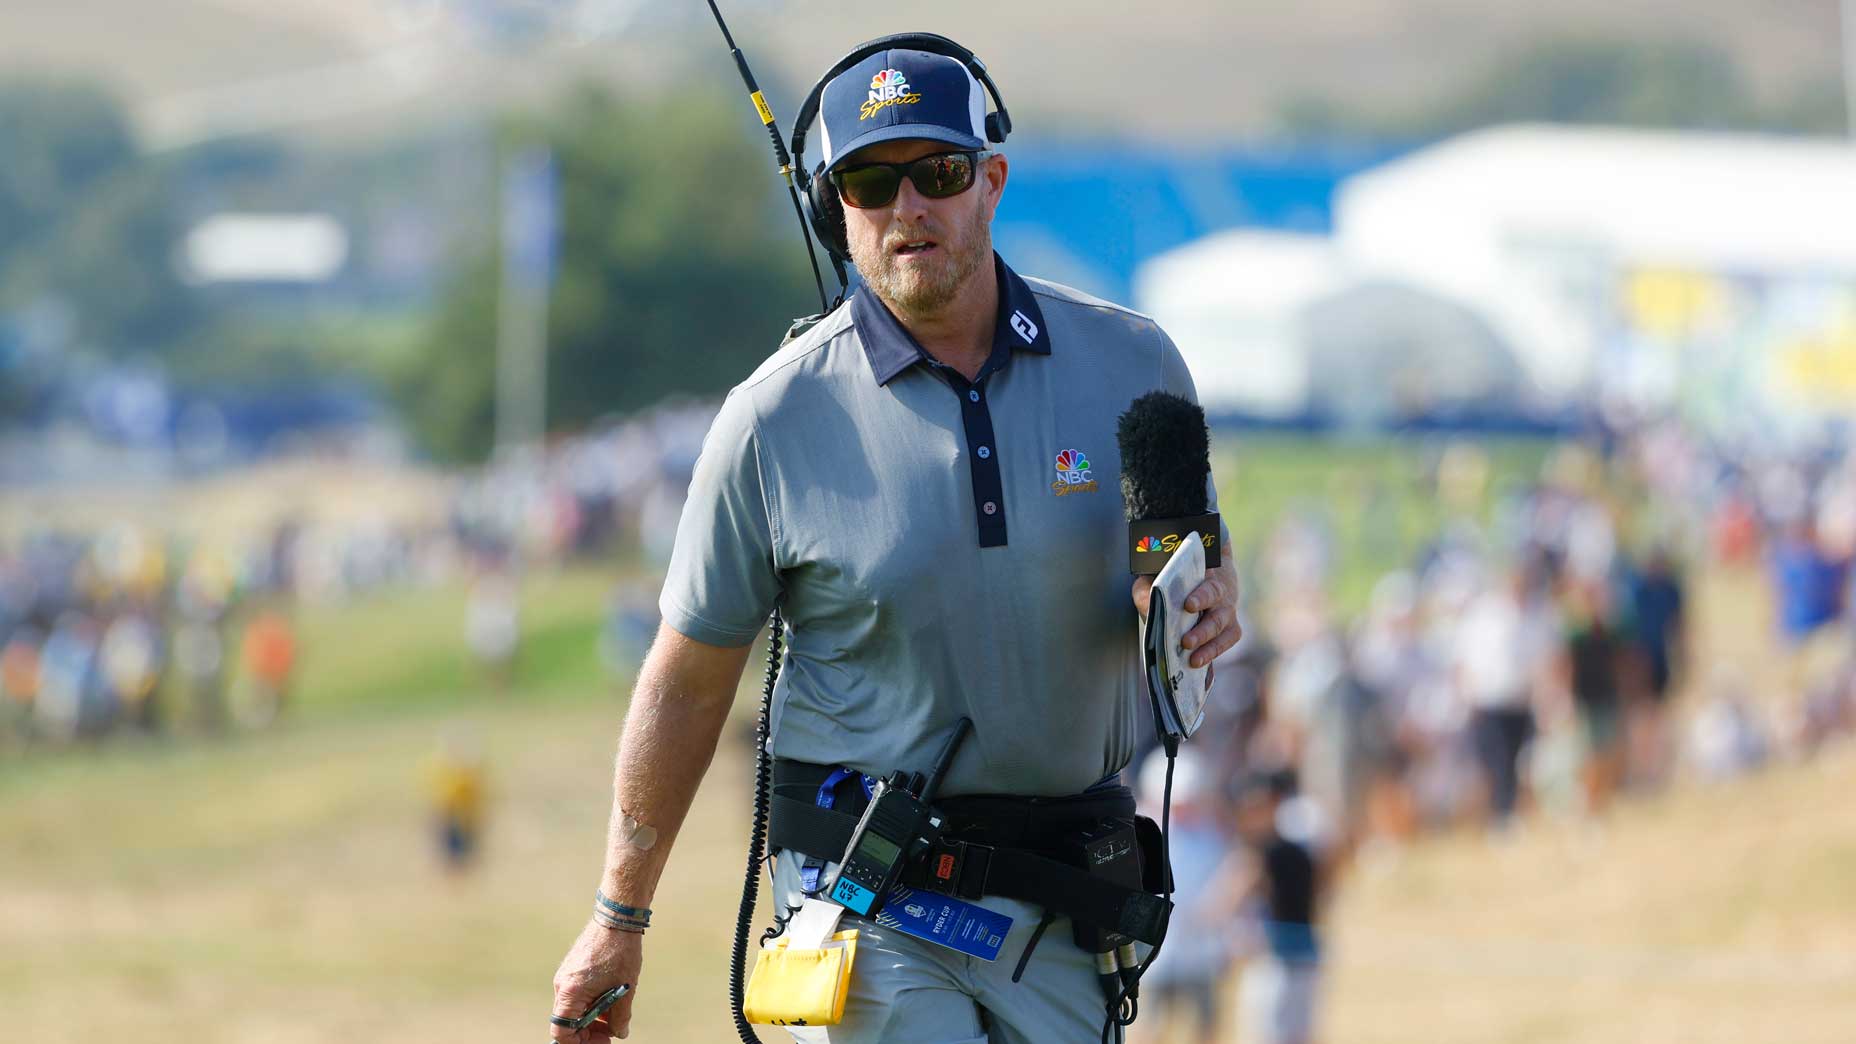 John Wood acts as on-course reporter at 2023 Ryder Cup.